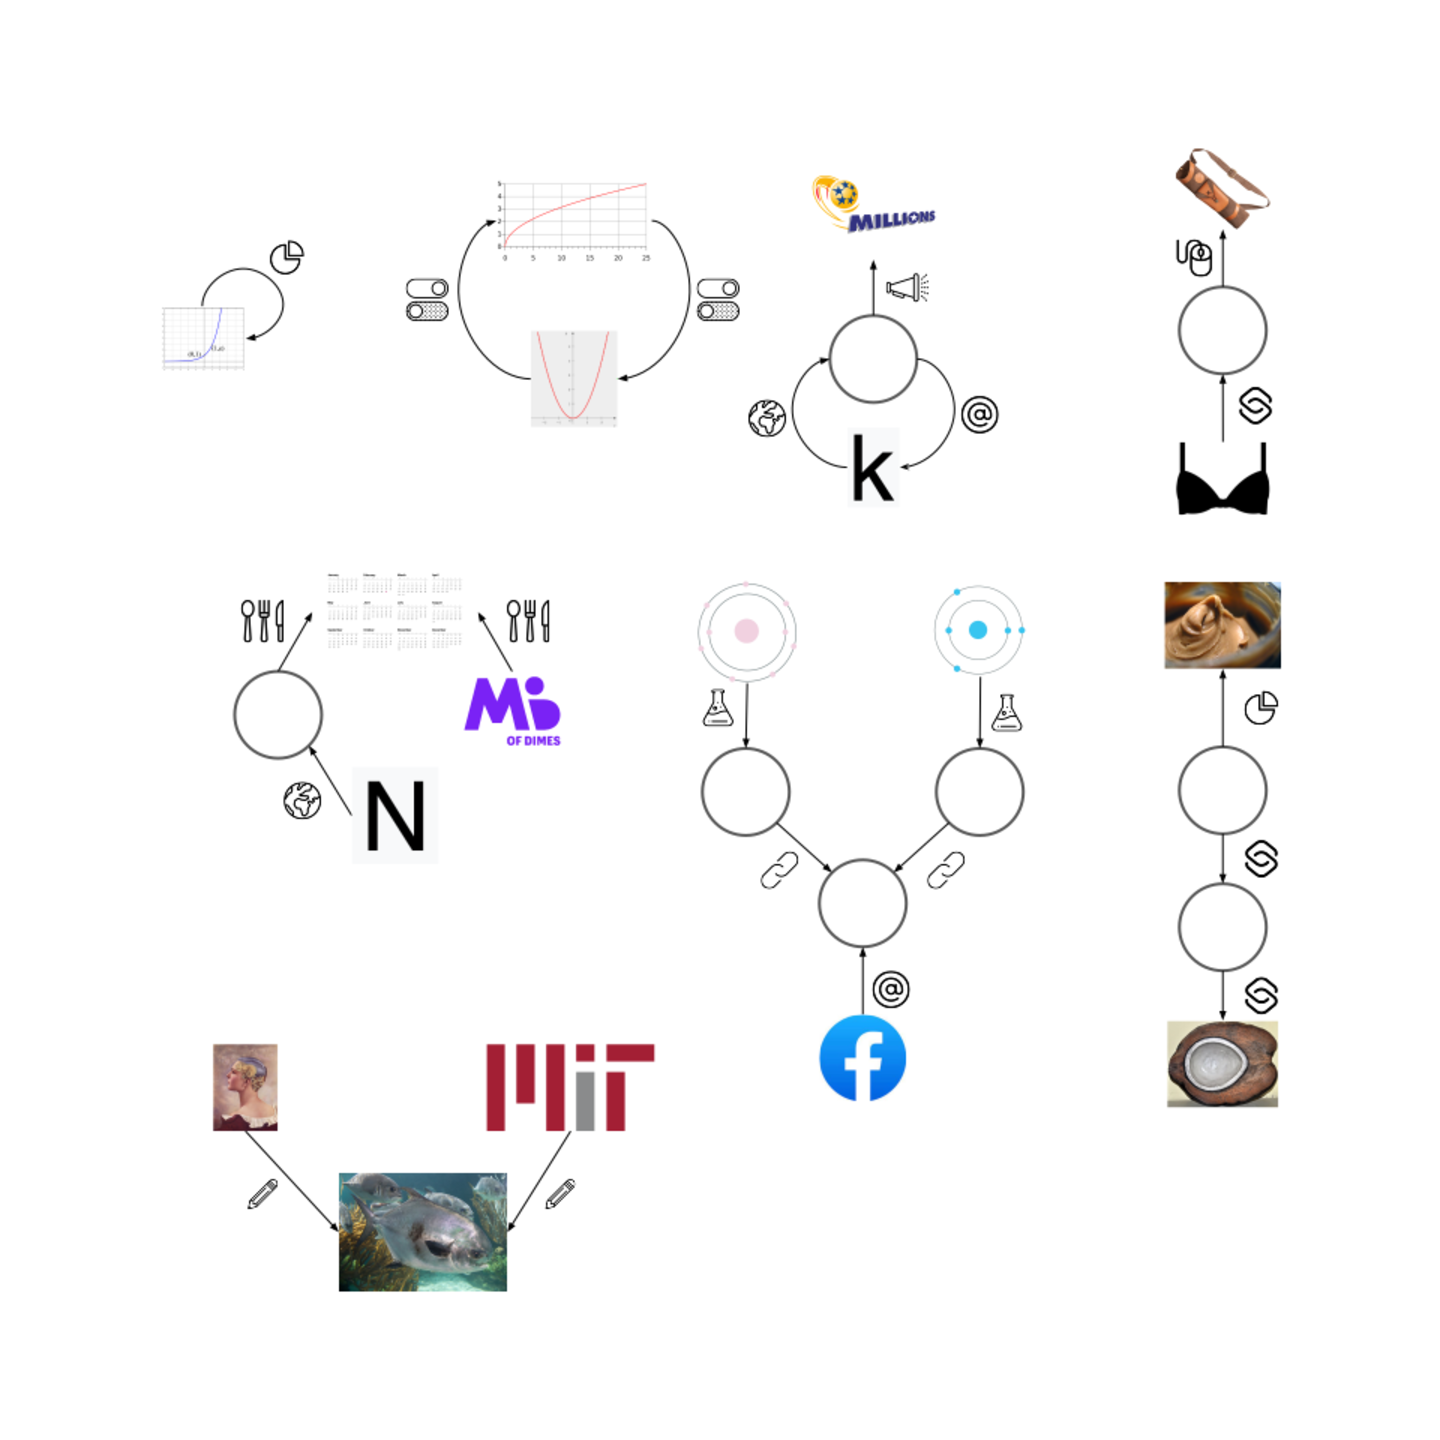 A diagram with images and circles connected by arrows